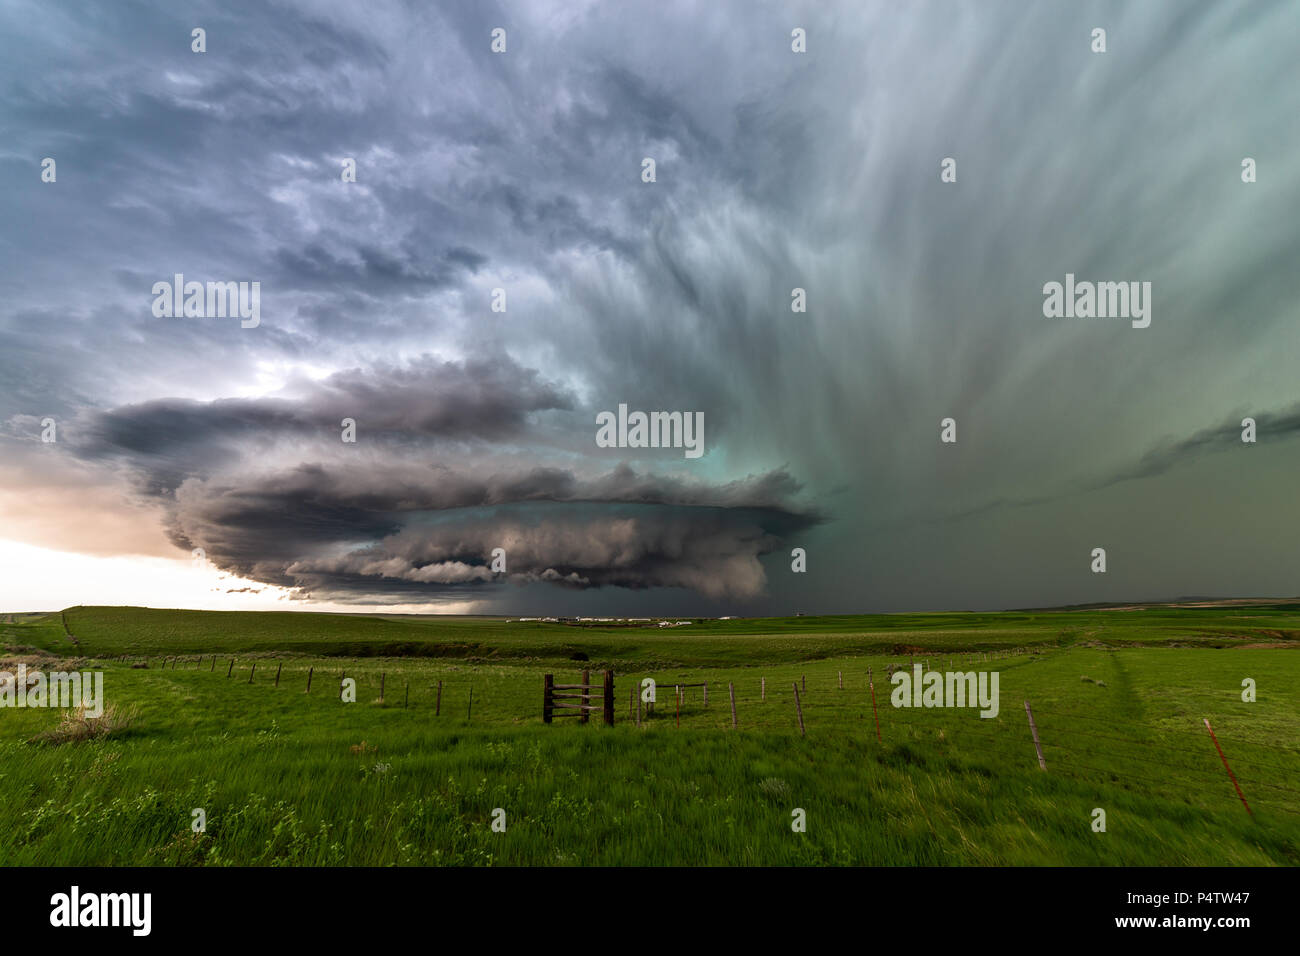 Ominous sky and supercell thunderstorm over a Great Plains landscape near Ryegate, Montana, USA Stock Photo